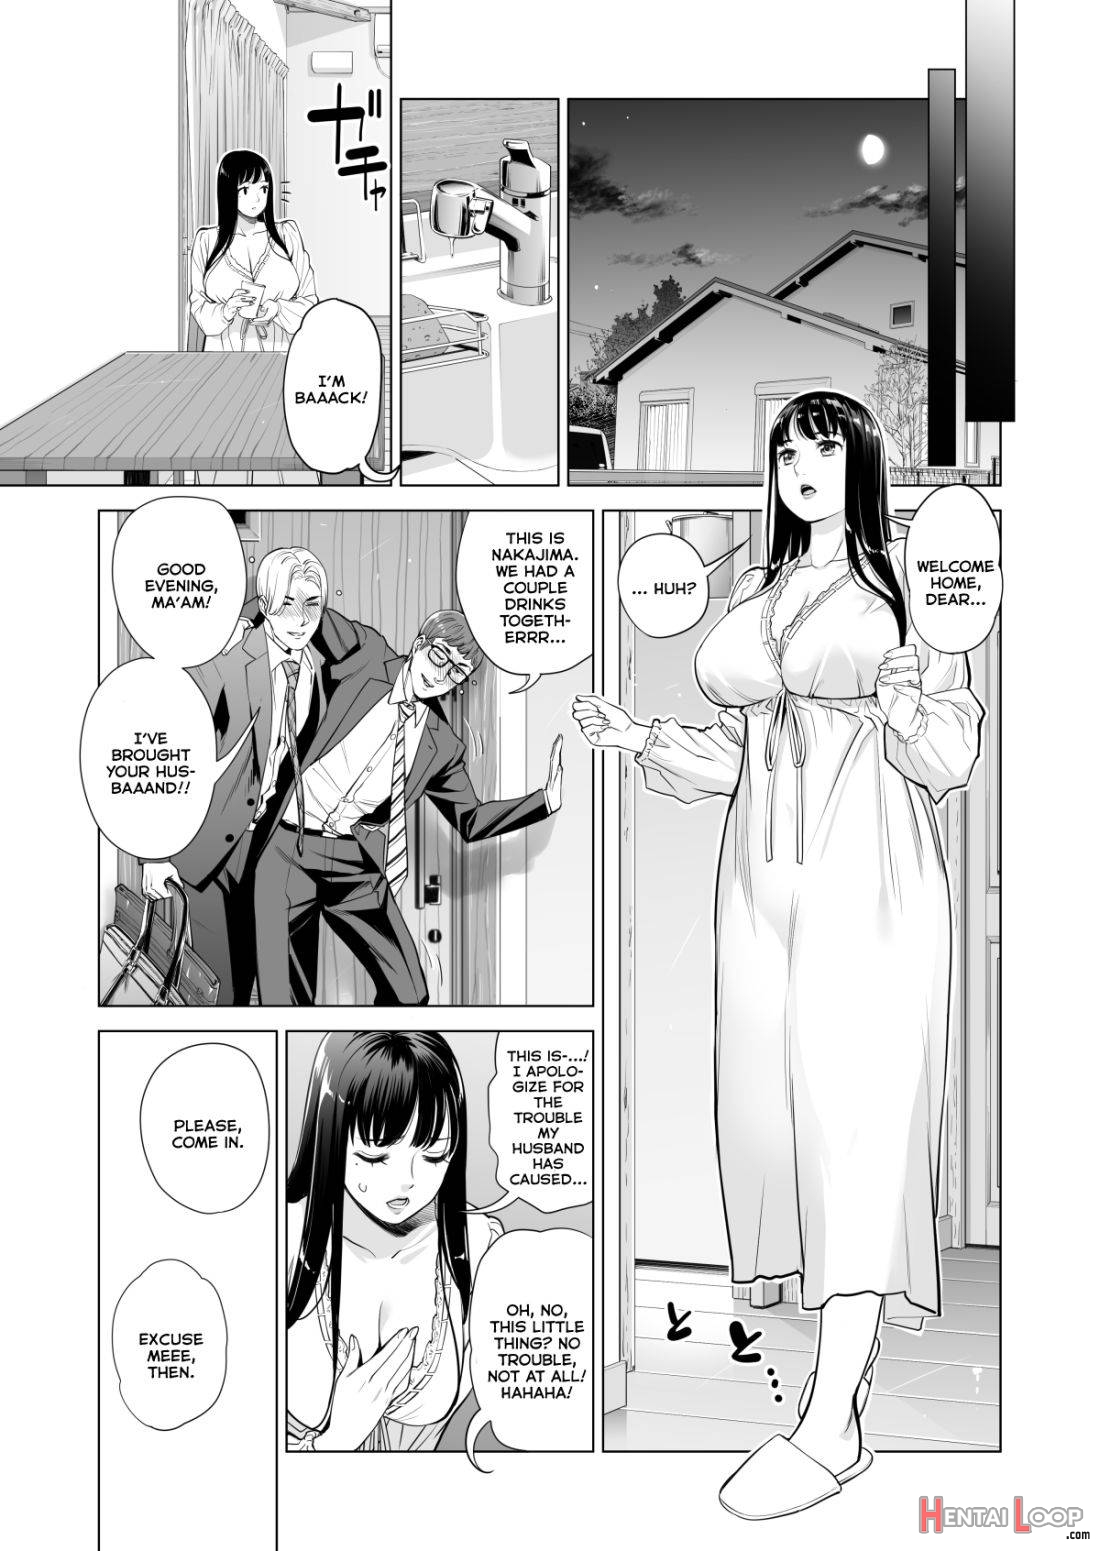 Tsukiyo no Midare Zake (Zenpen) Moonlit Intoxication ~ A Housewife Stolen by a Coworker Besides her Blackout Drunk Husband ~ Chapter 1 page 13